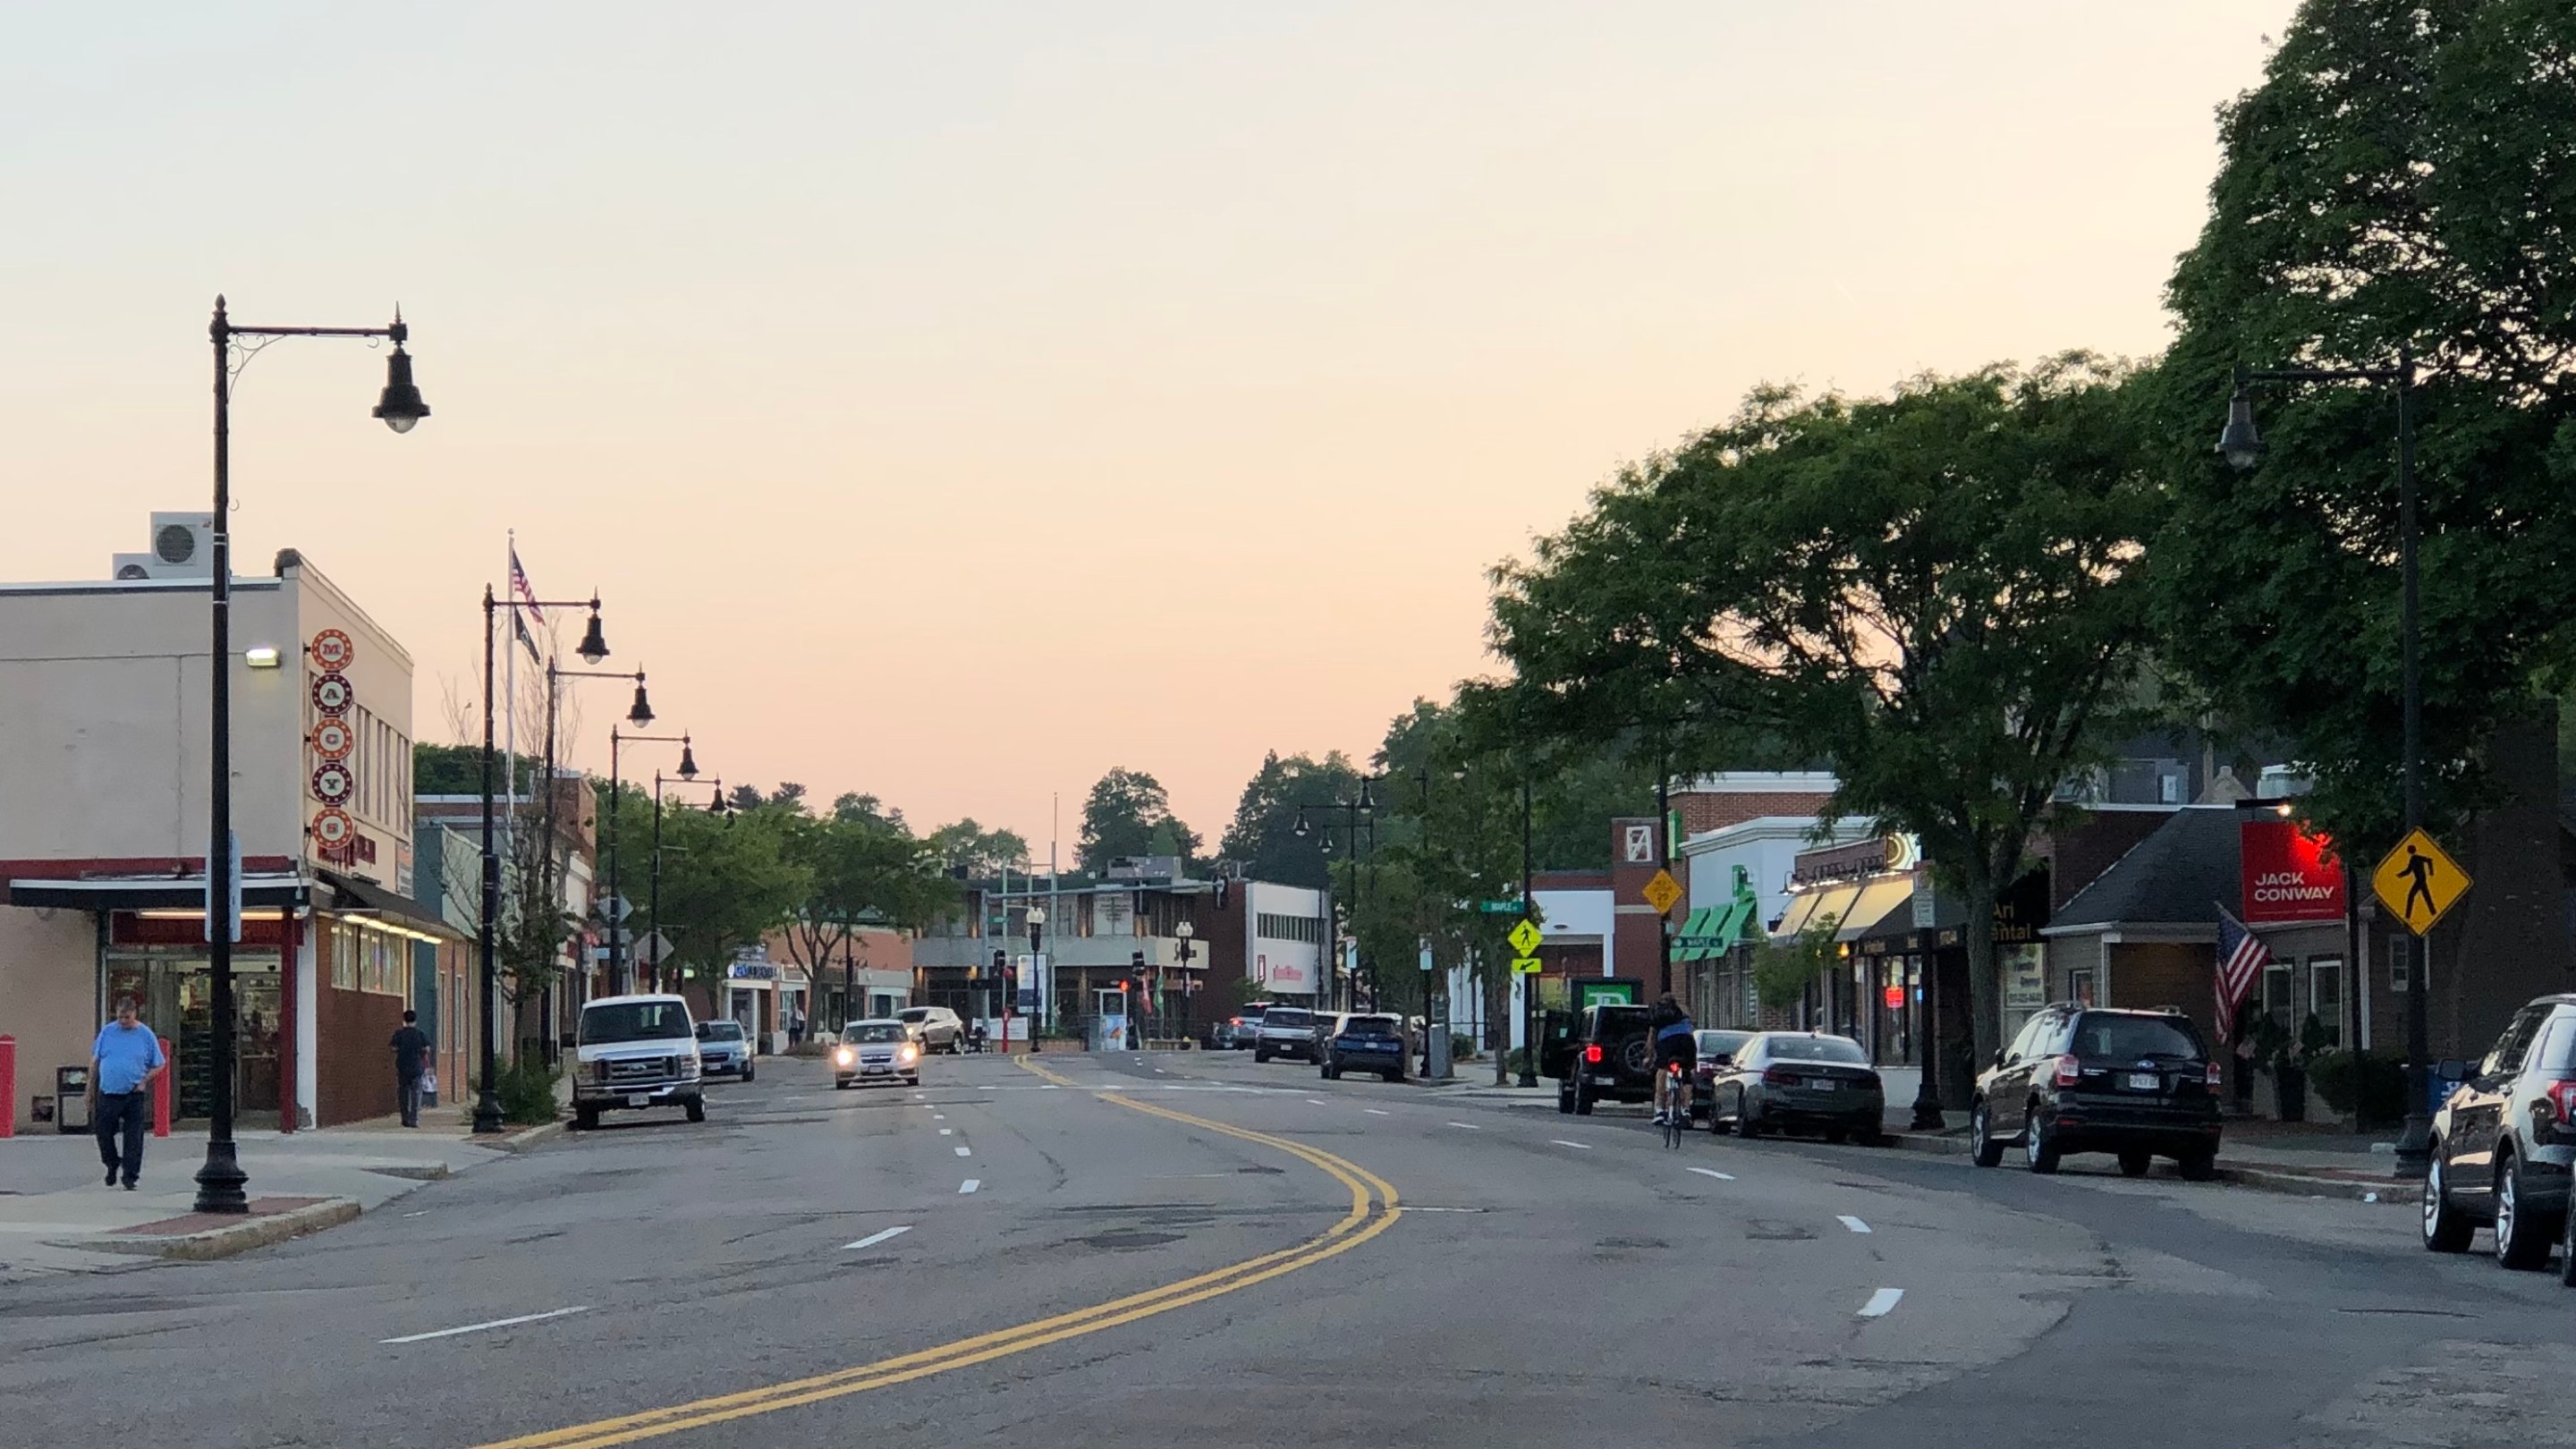 A sunset view down a mostly-empty, wide four-lane street lined with small businesses and parked cars.